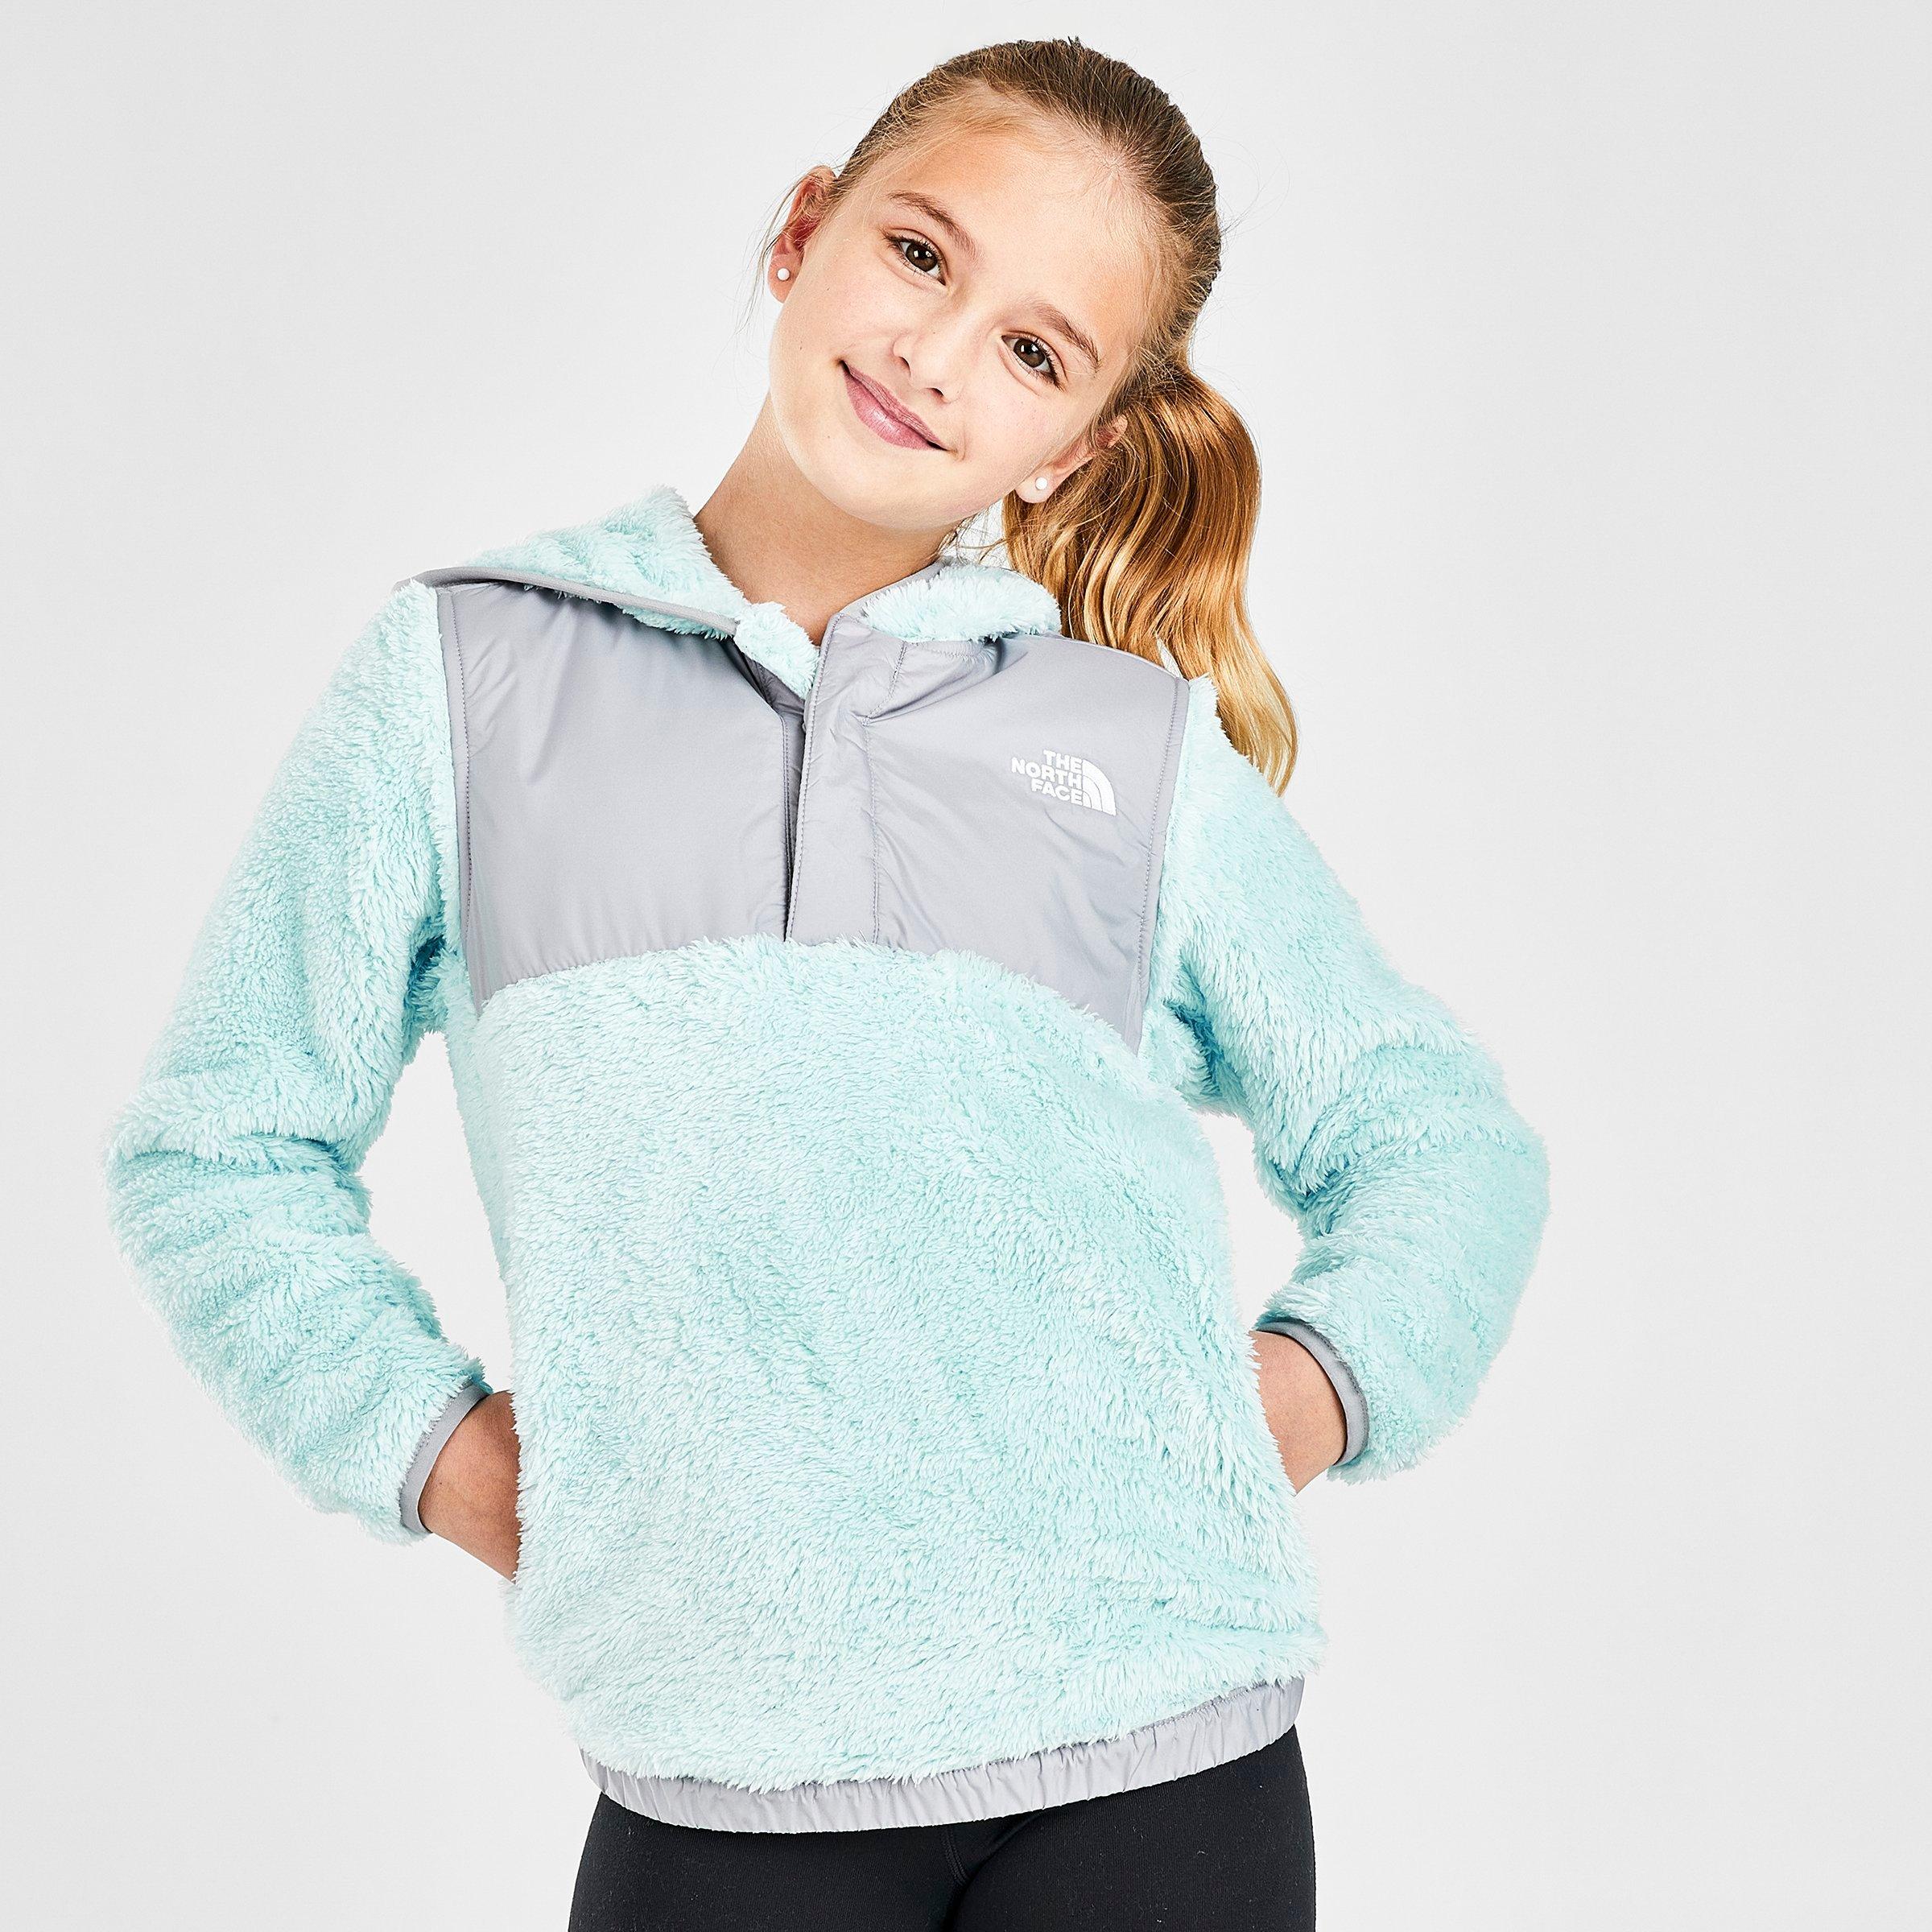 girls north face pullover